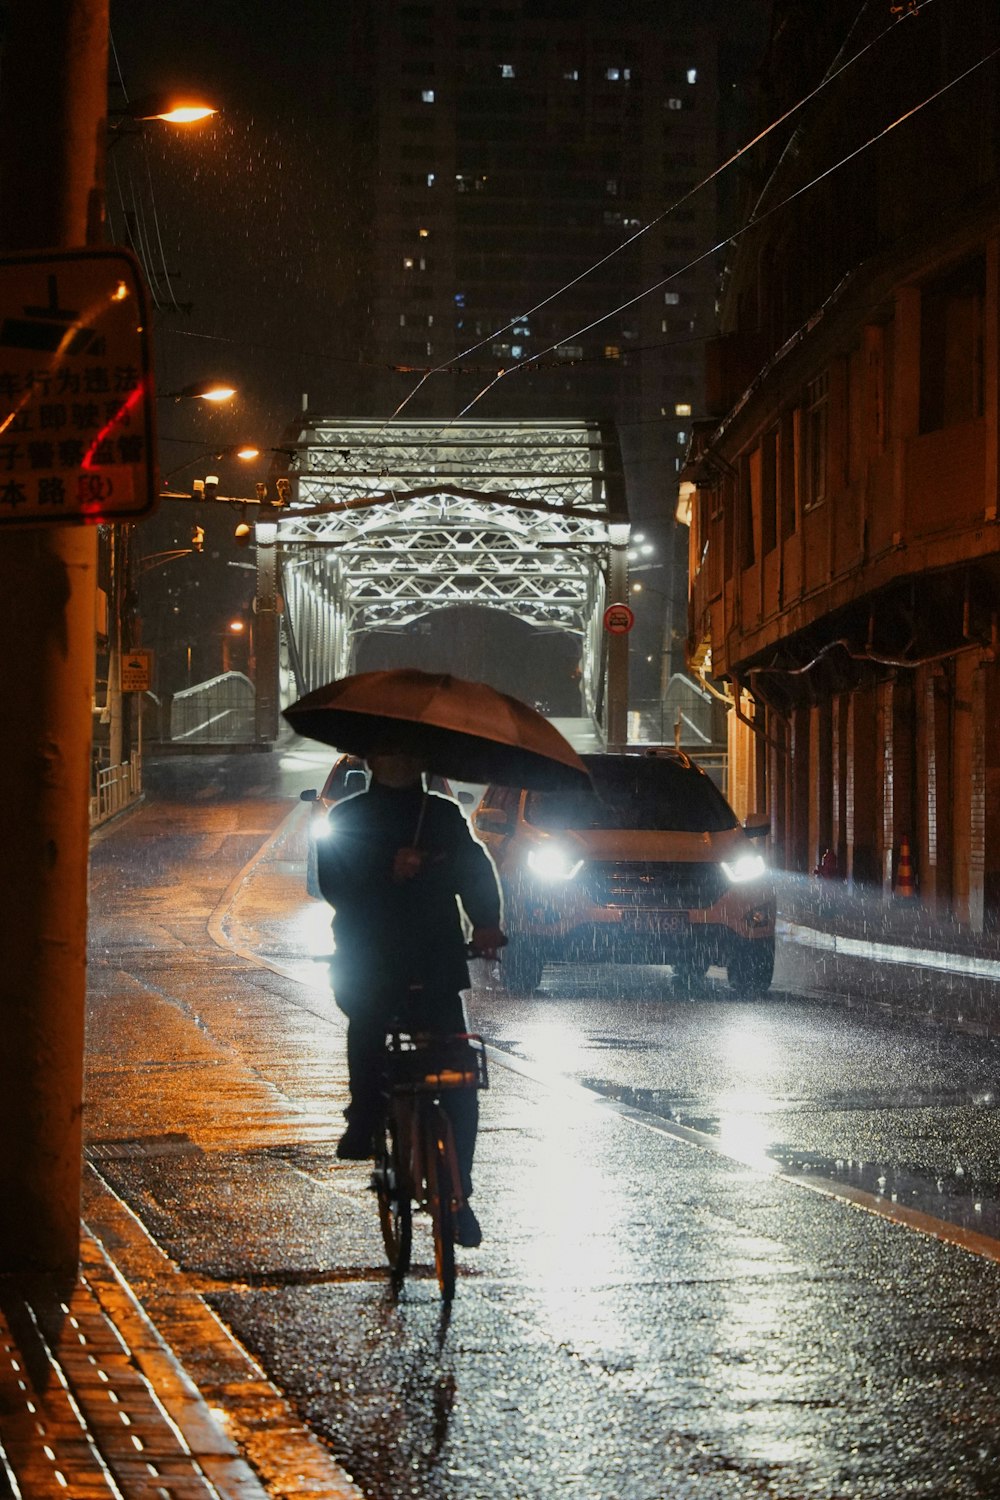 a person riding a bicycle with an umbrella in the rain